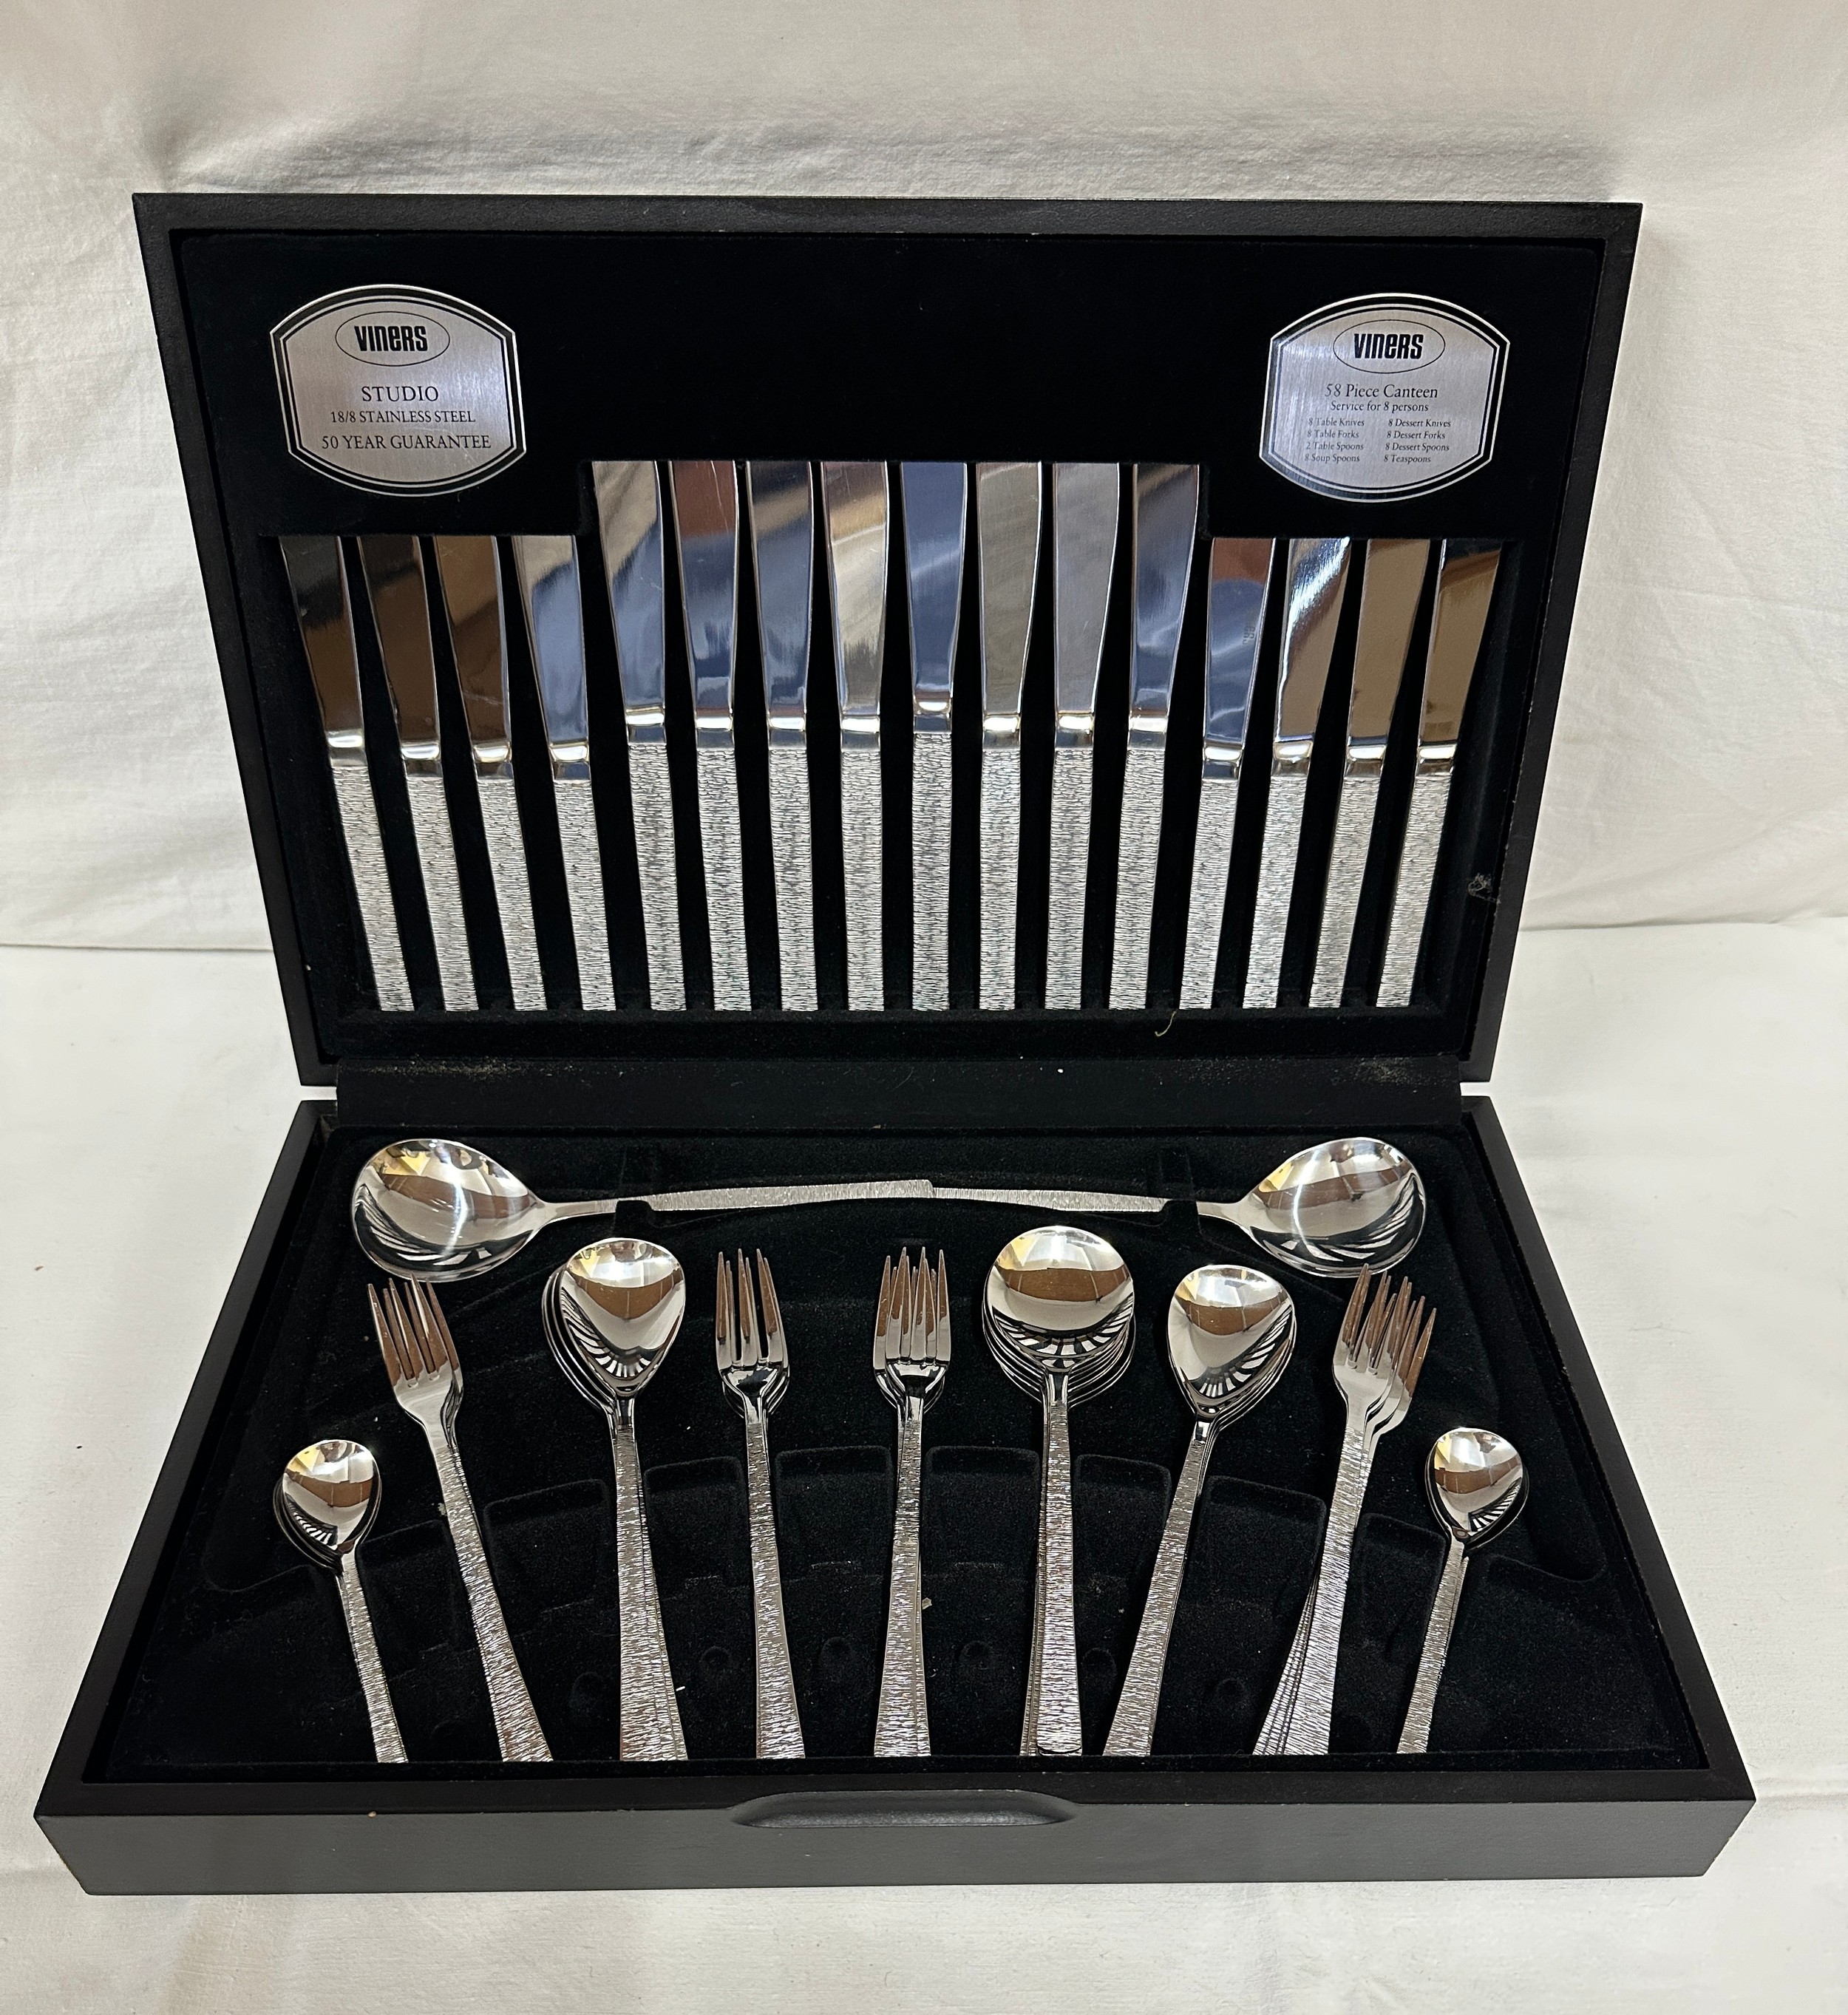 A Viners 8 piece canteen of cutlery by Gerald Benney, missing 1 teaspoon and 1 dessert fork (56).